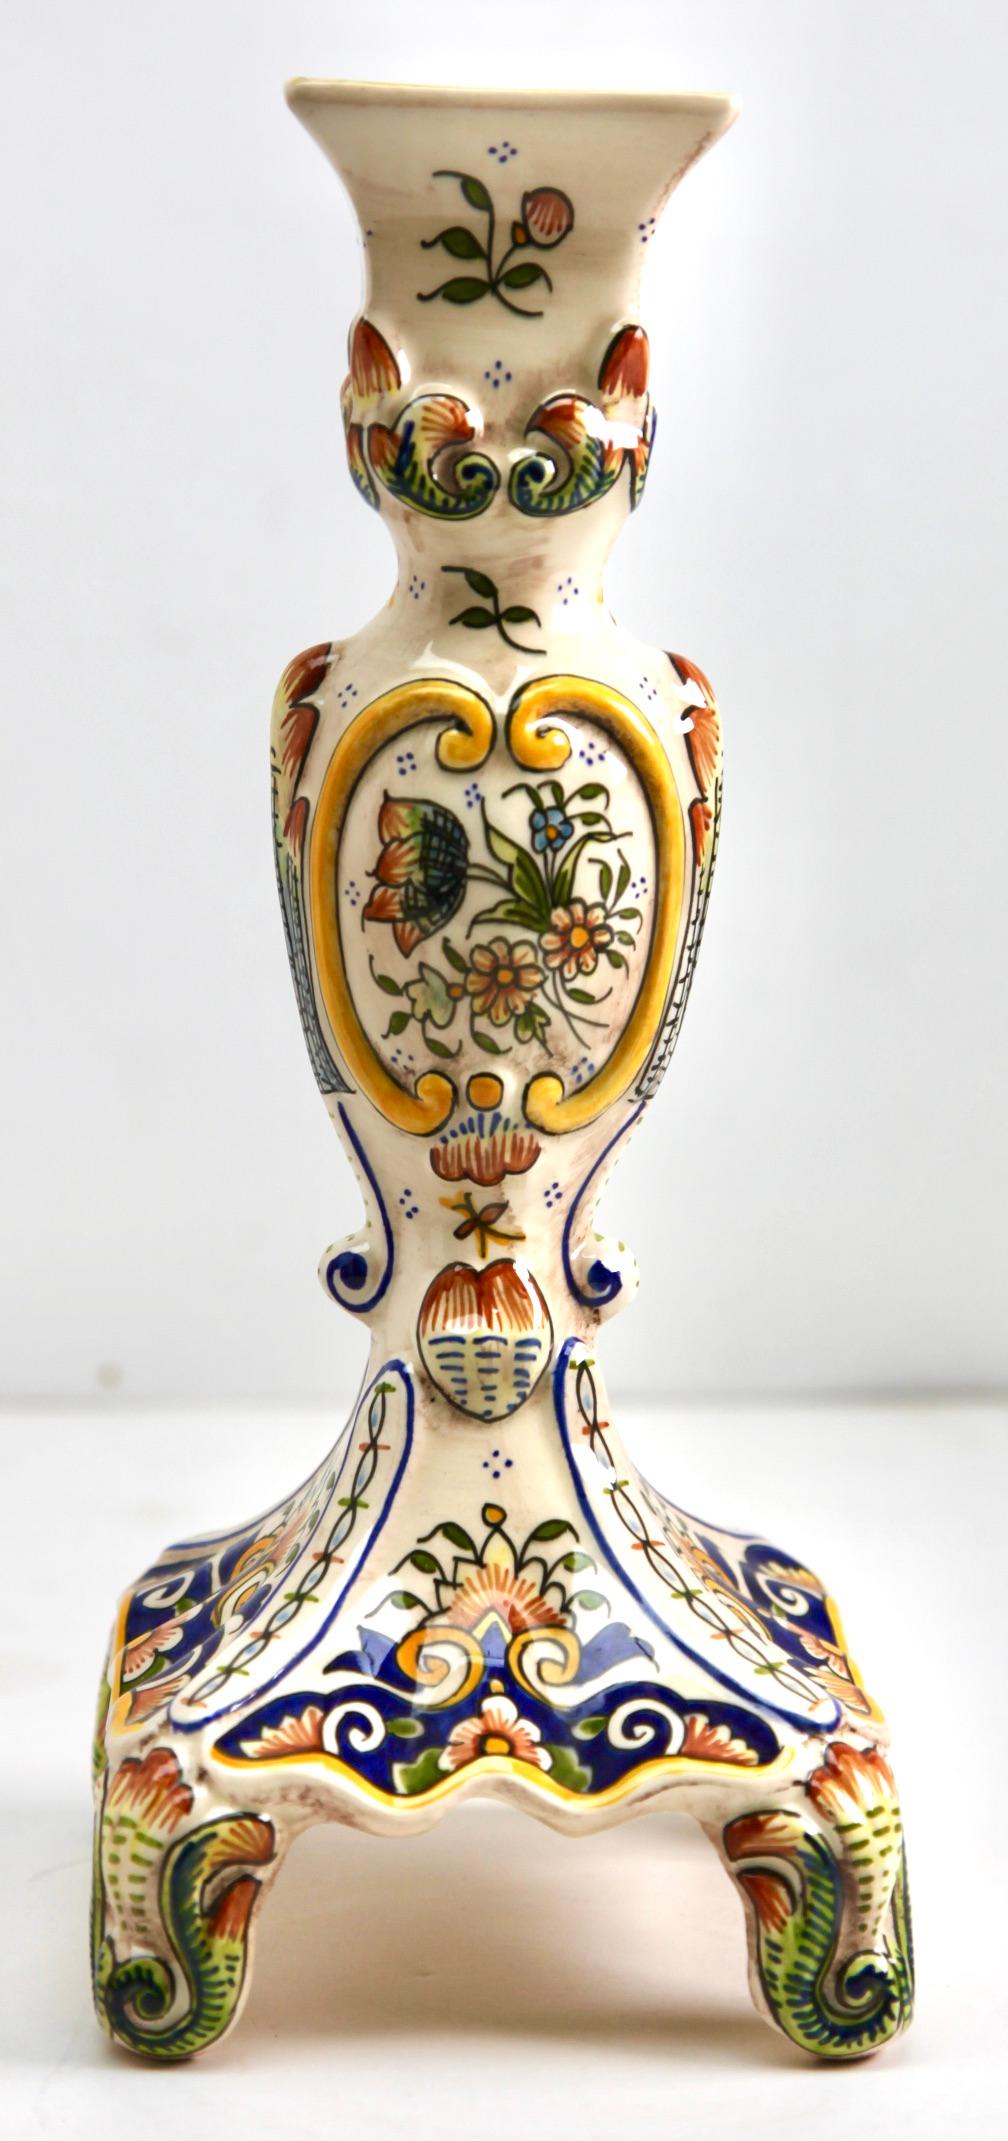 The designs on this French faience group is typical of pottery made in Rouen. 
Early 20th Century French Hand-Painted Faience Candlestick from Rouen
Marking on the bottom: 